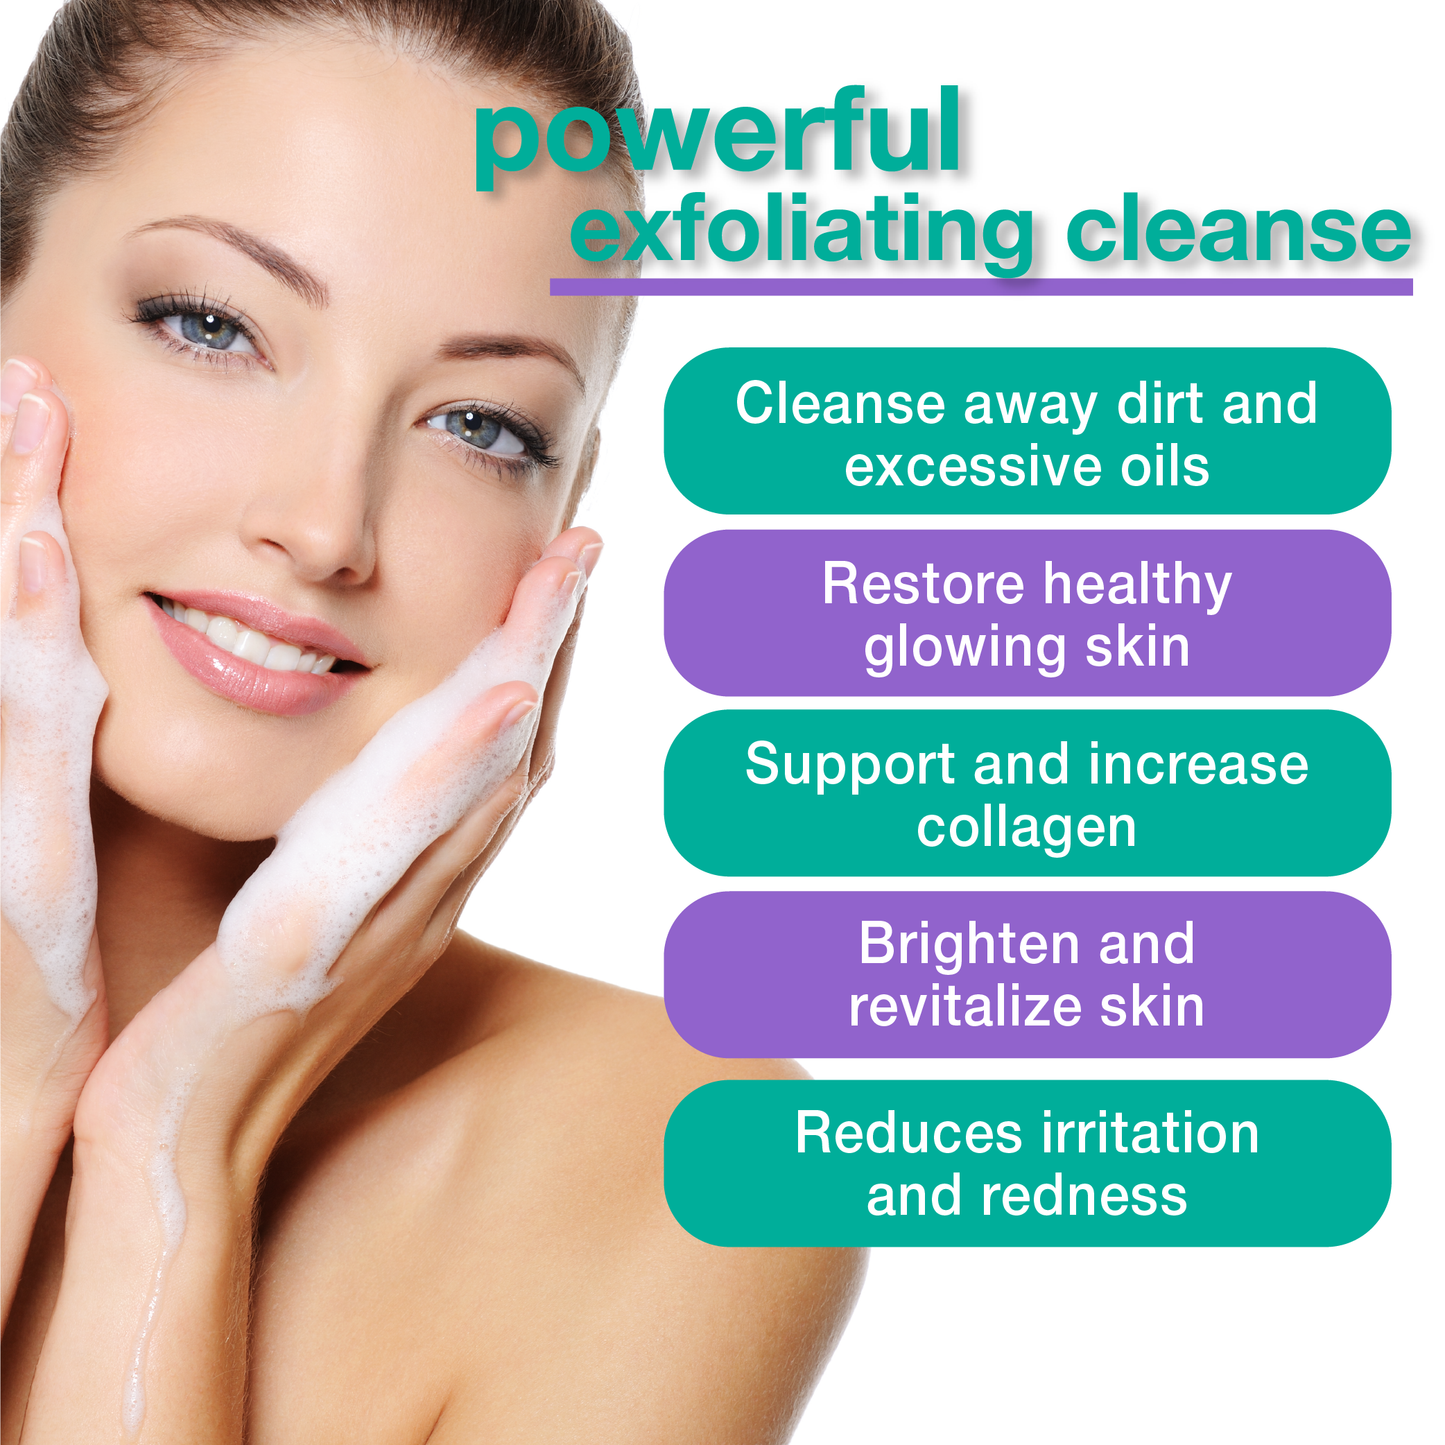 Glycolic Acid Cleanser Graphics